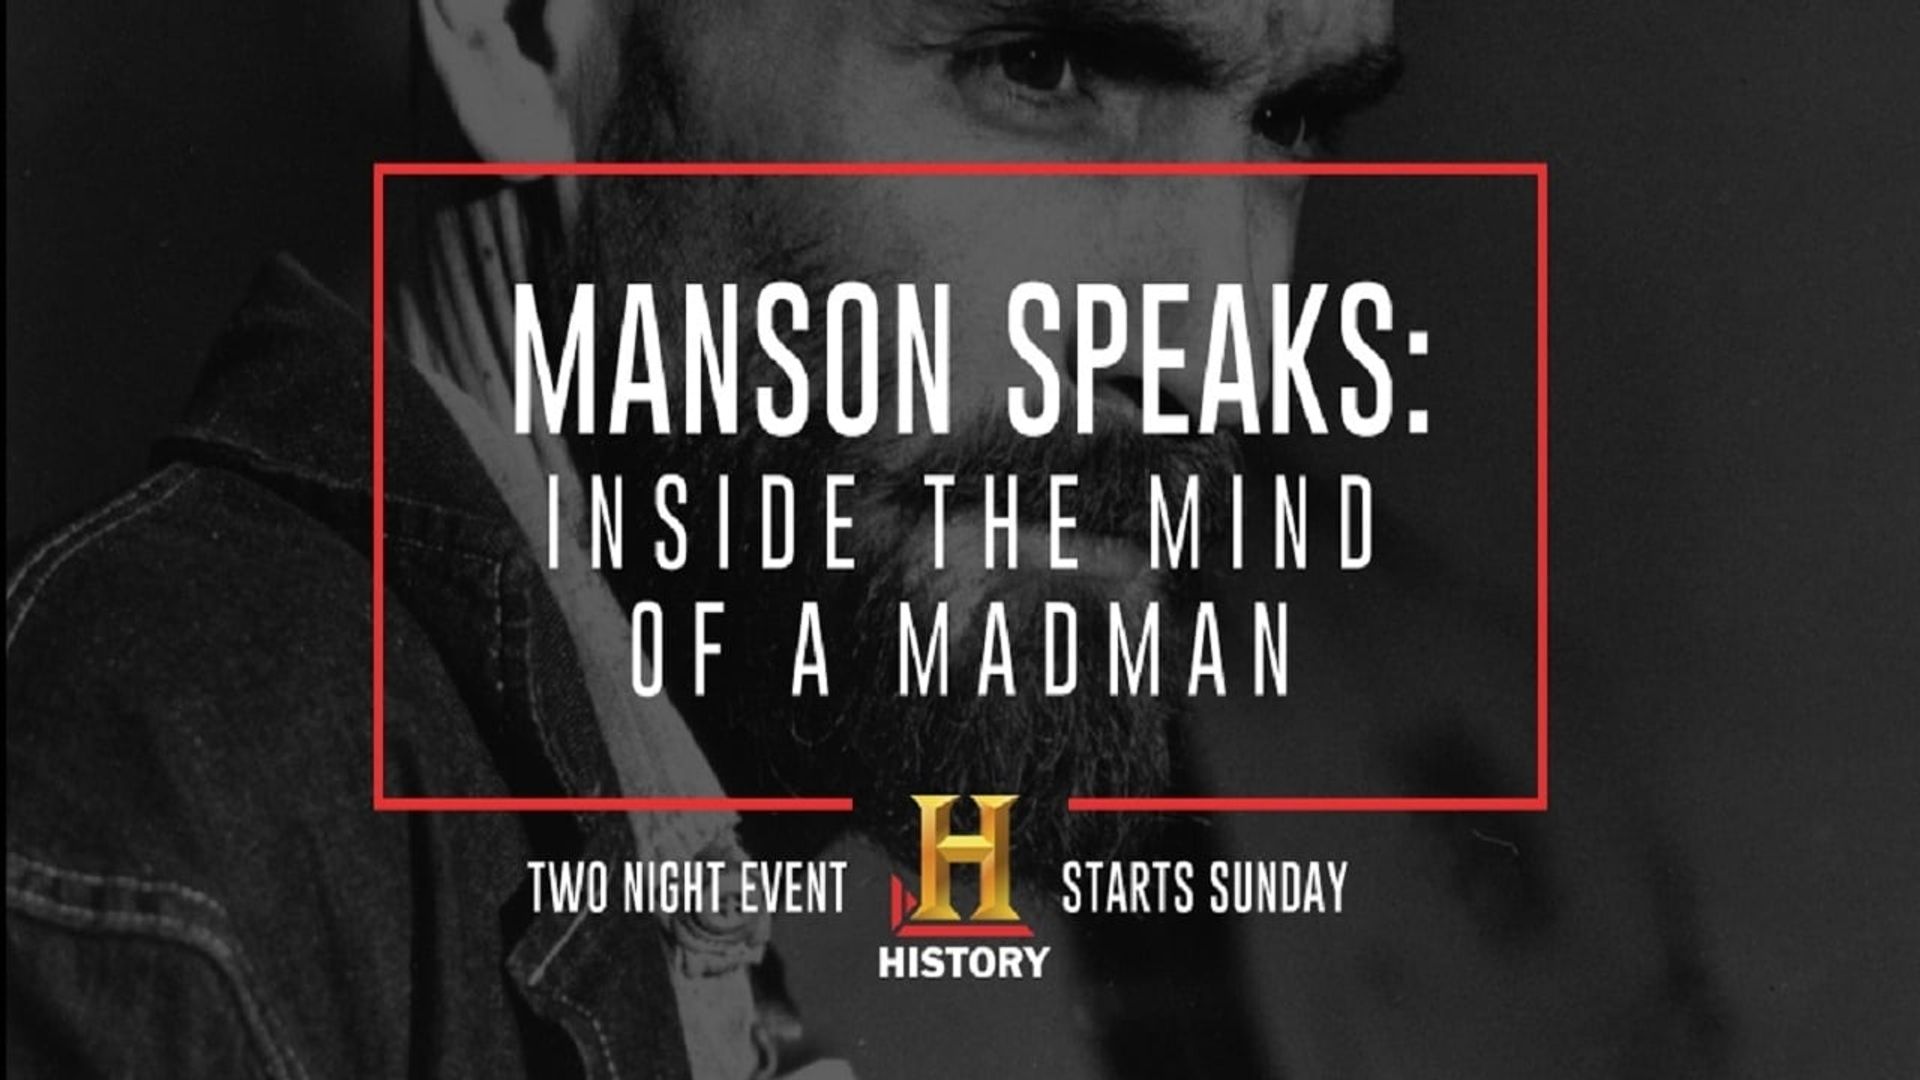 Manson Speaks: Inside the Mind of a Madman background